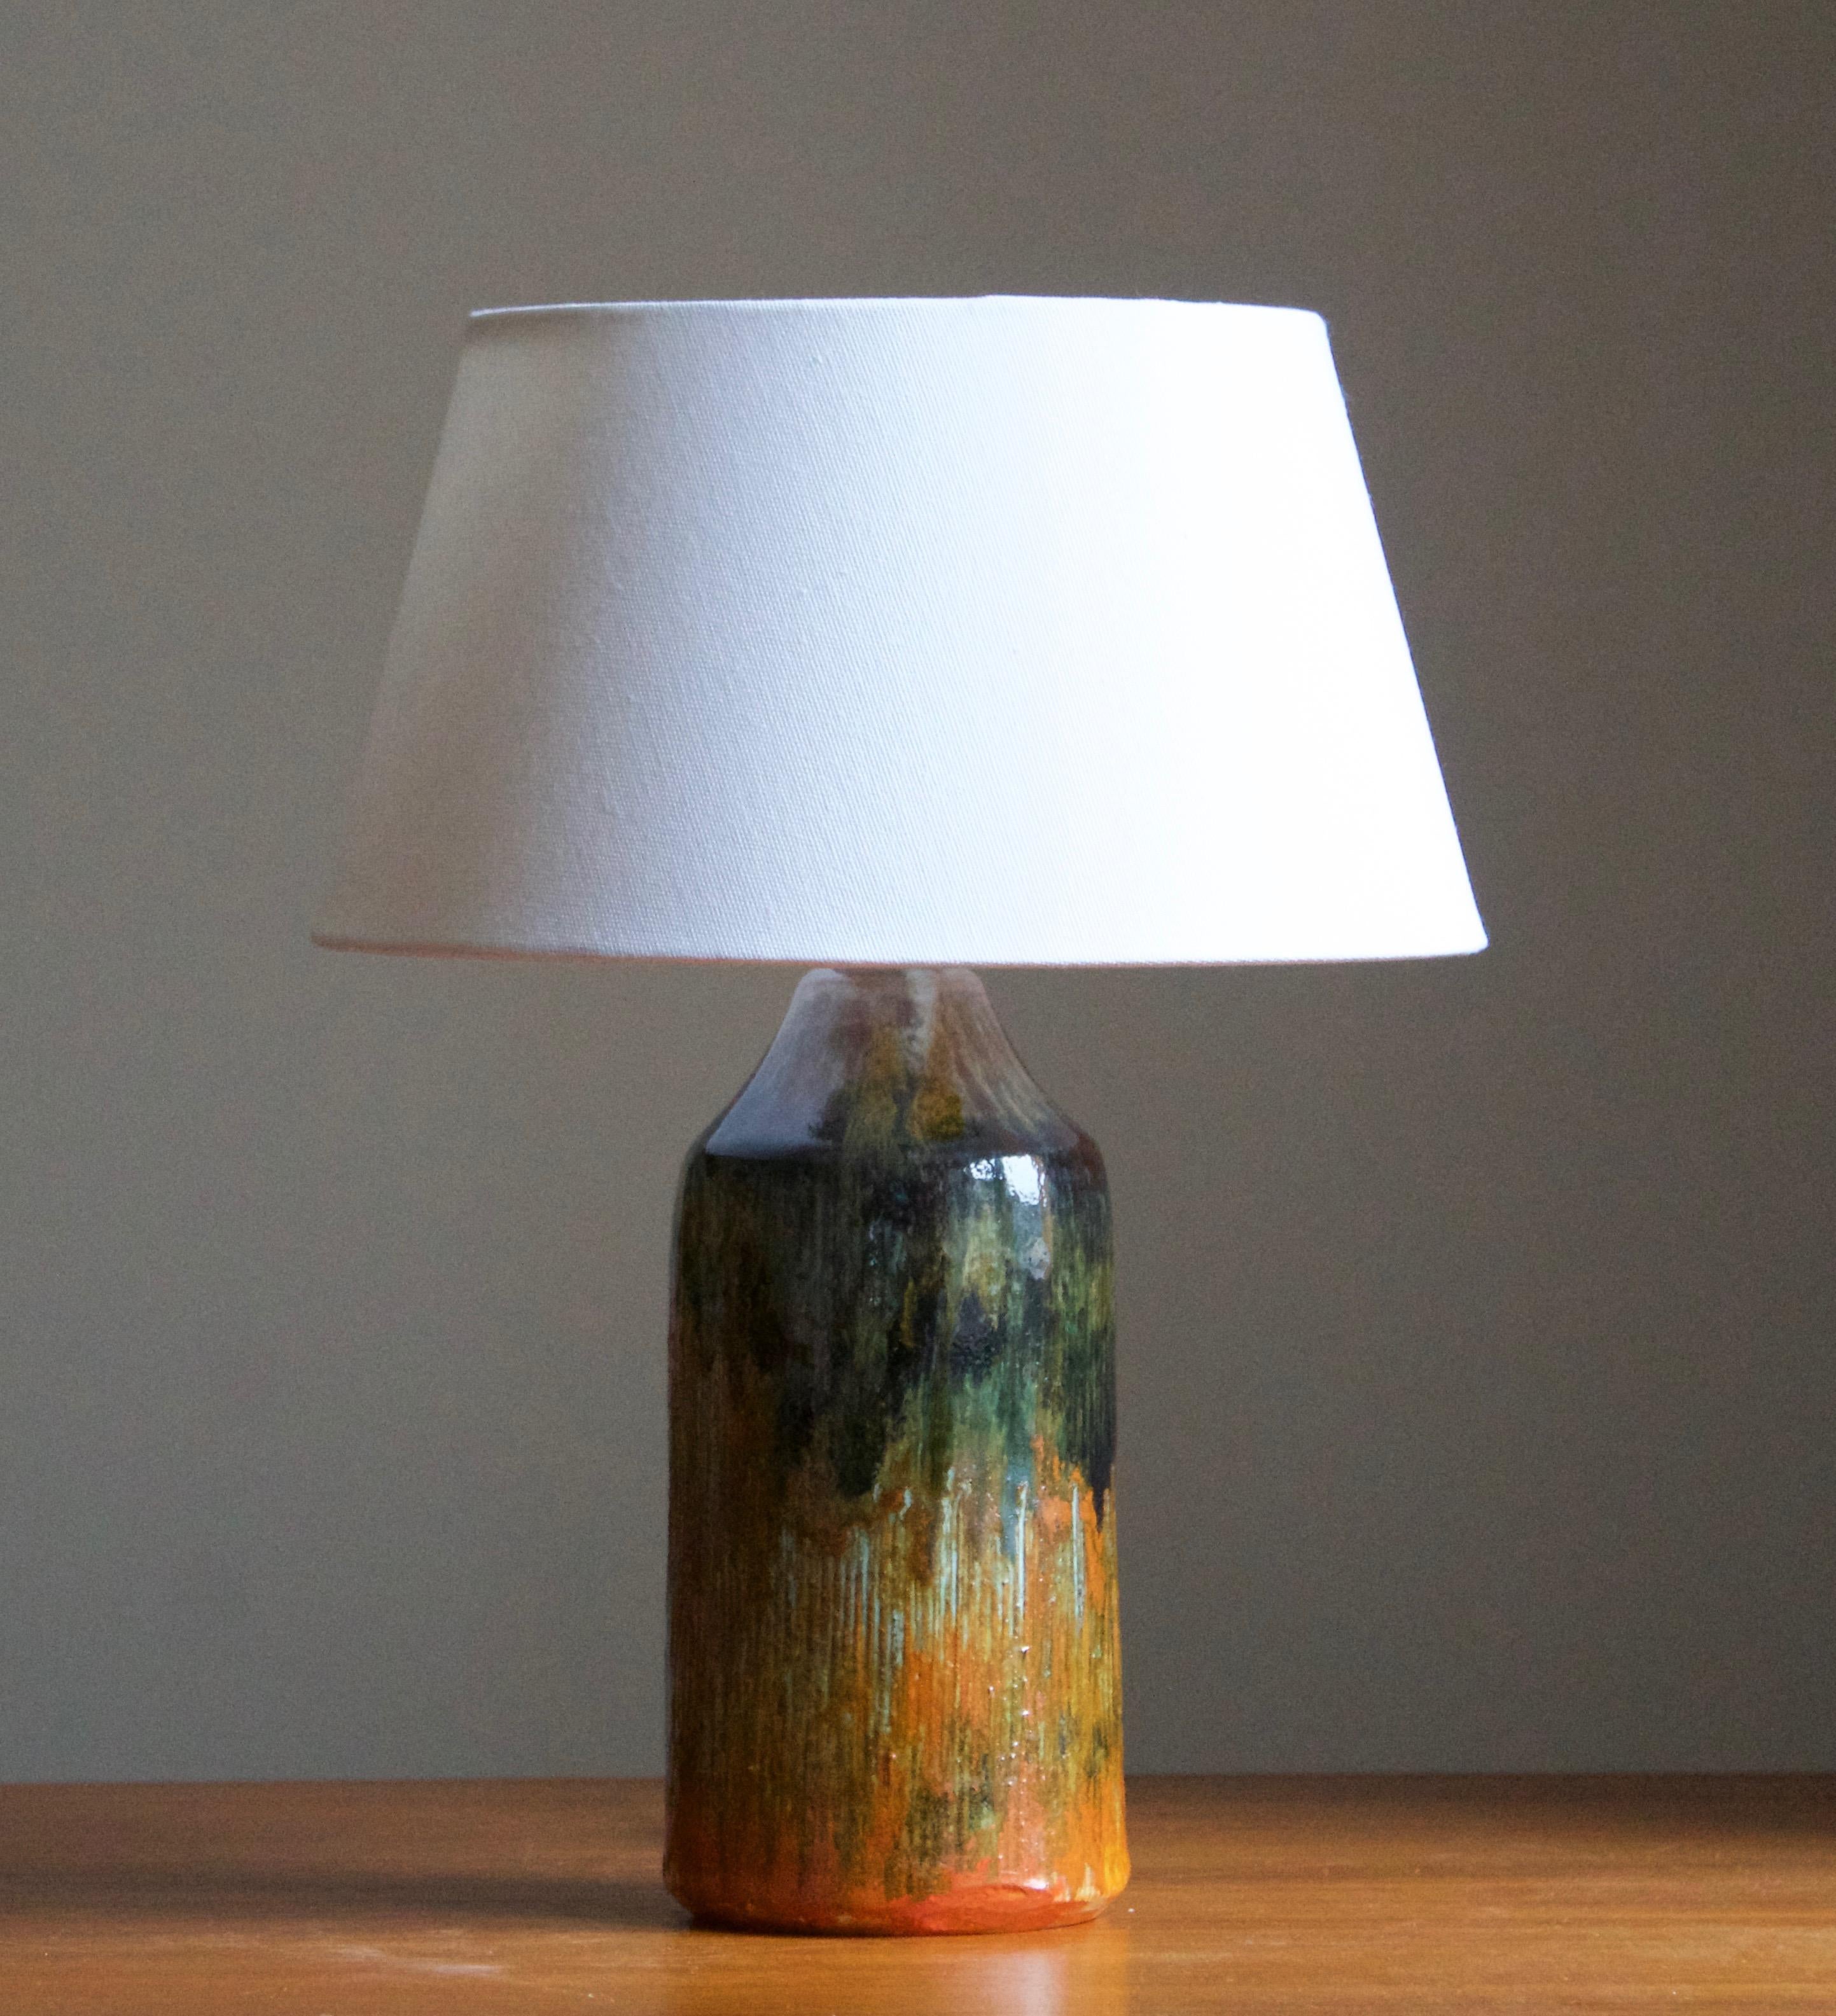 A glazed stoneware table lamp. By Tilgmans Keramik, 1950s. Features a complex glaze combined with incised decor in a style iconic to the producer. Features green, blue orange and red tones.

Stated dimensions exclude lampshade. Height includes